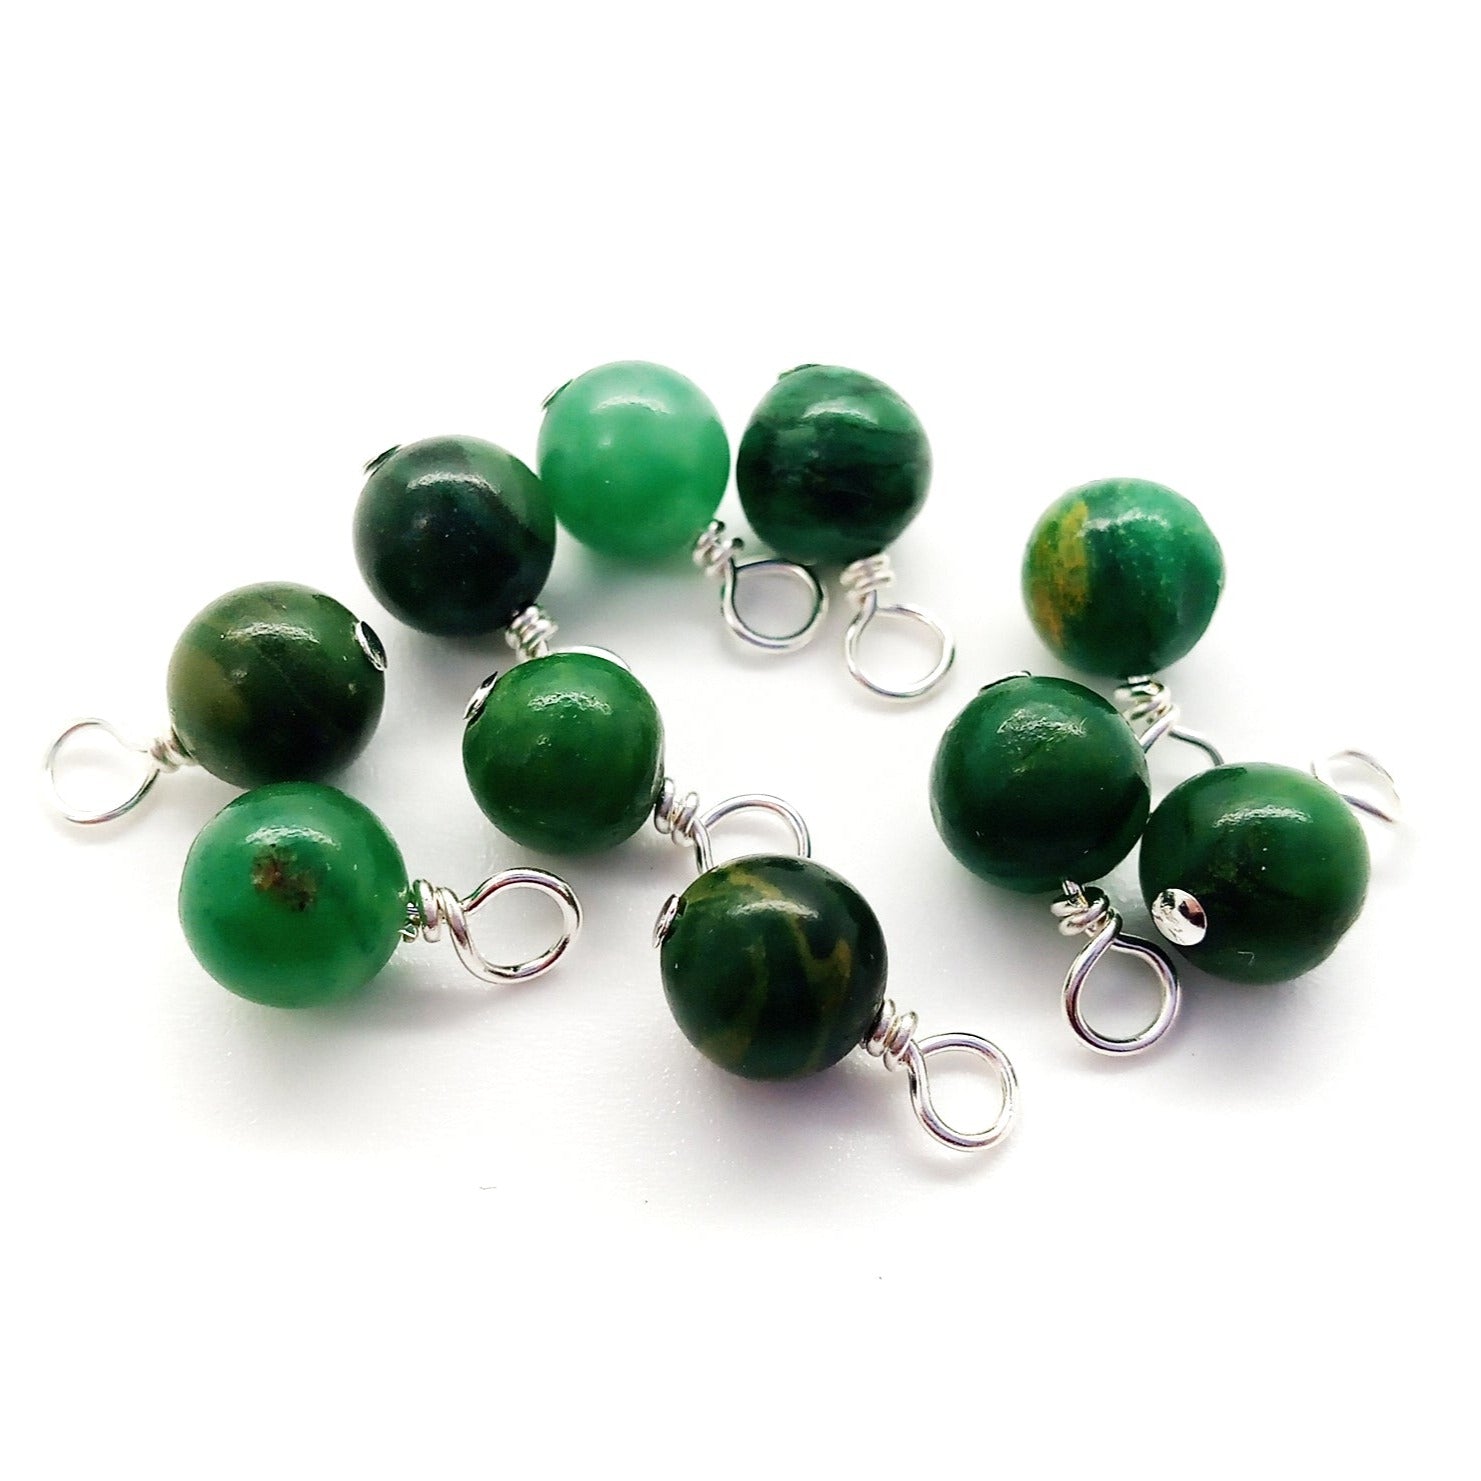 African green jade  6mm gemstone bead dangle charms, made by Adorabilities.